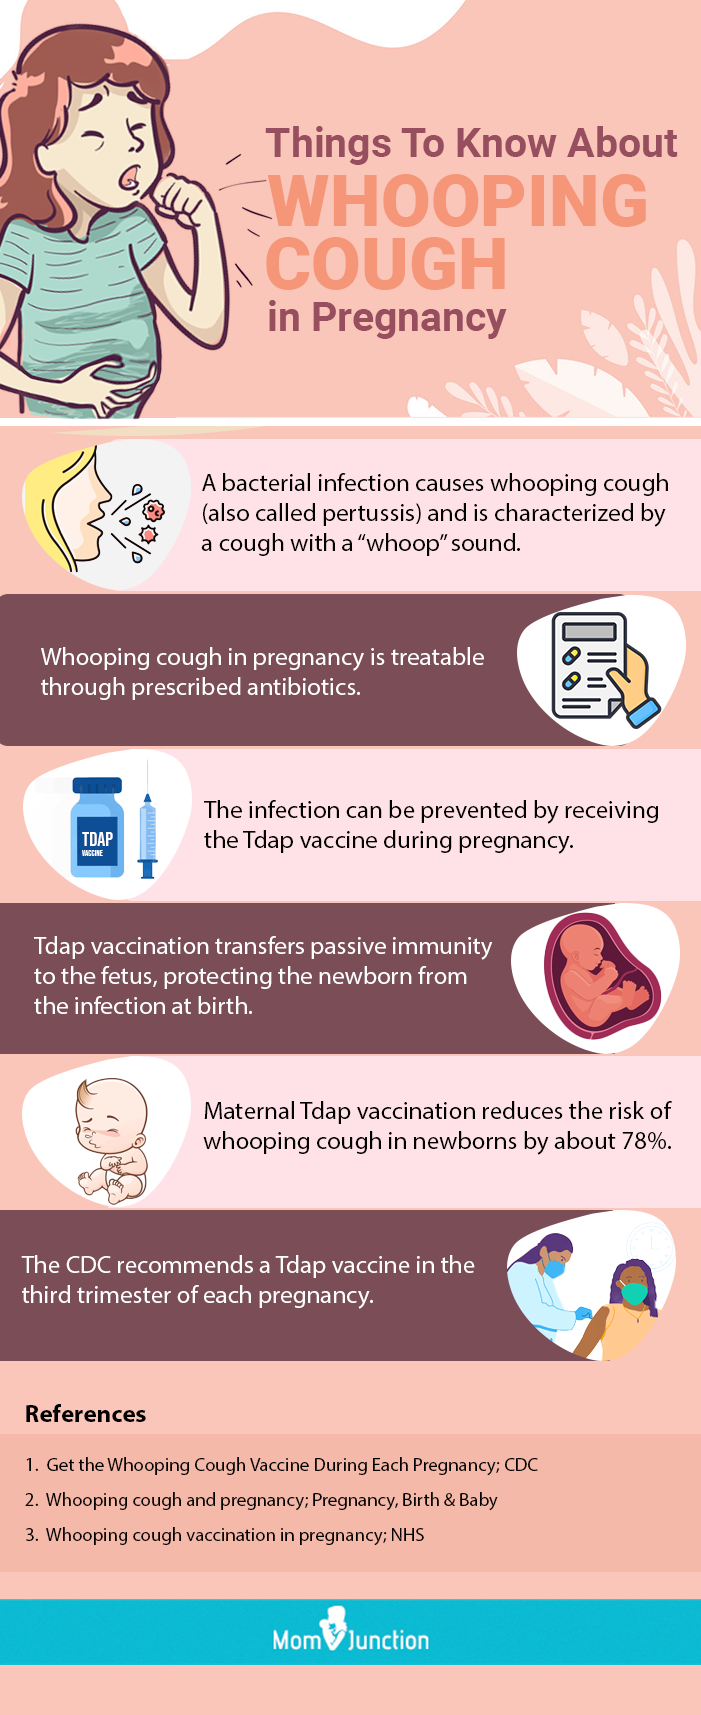 things to know about whooping cough in pregnancy (infographic)